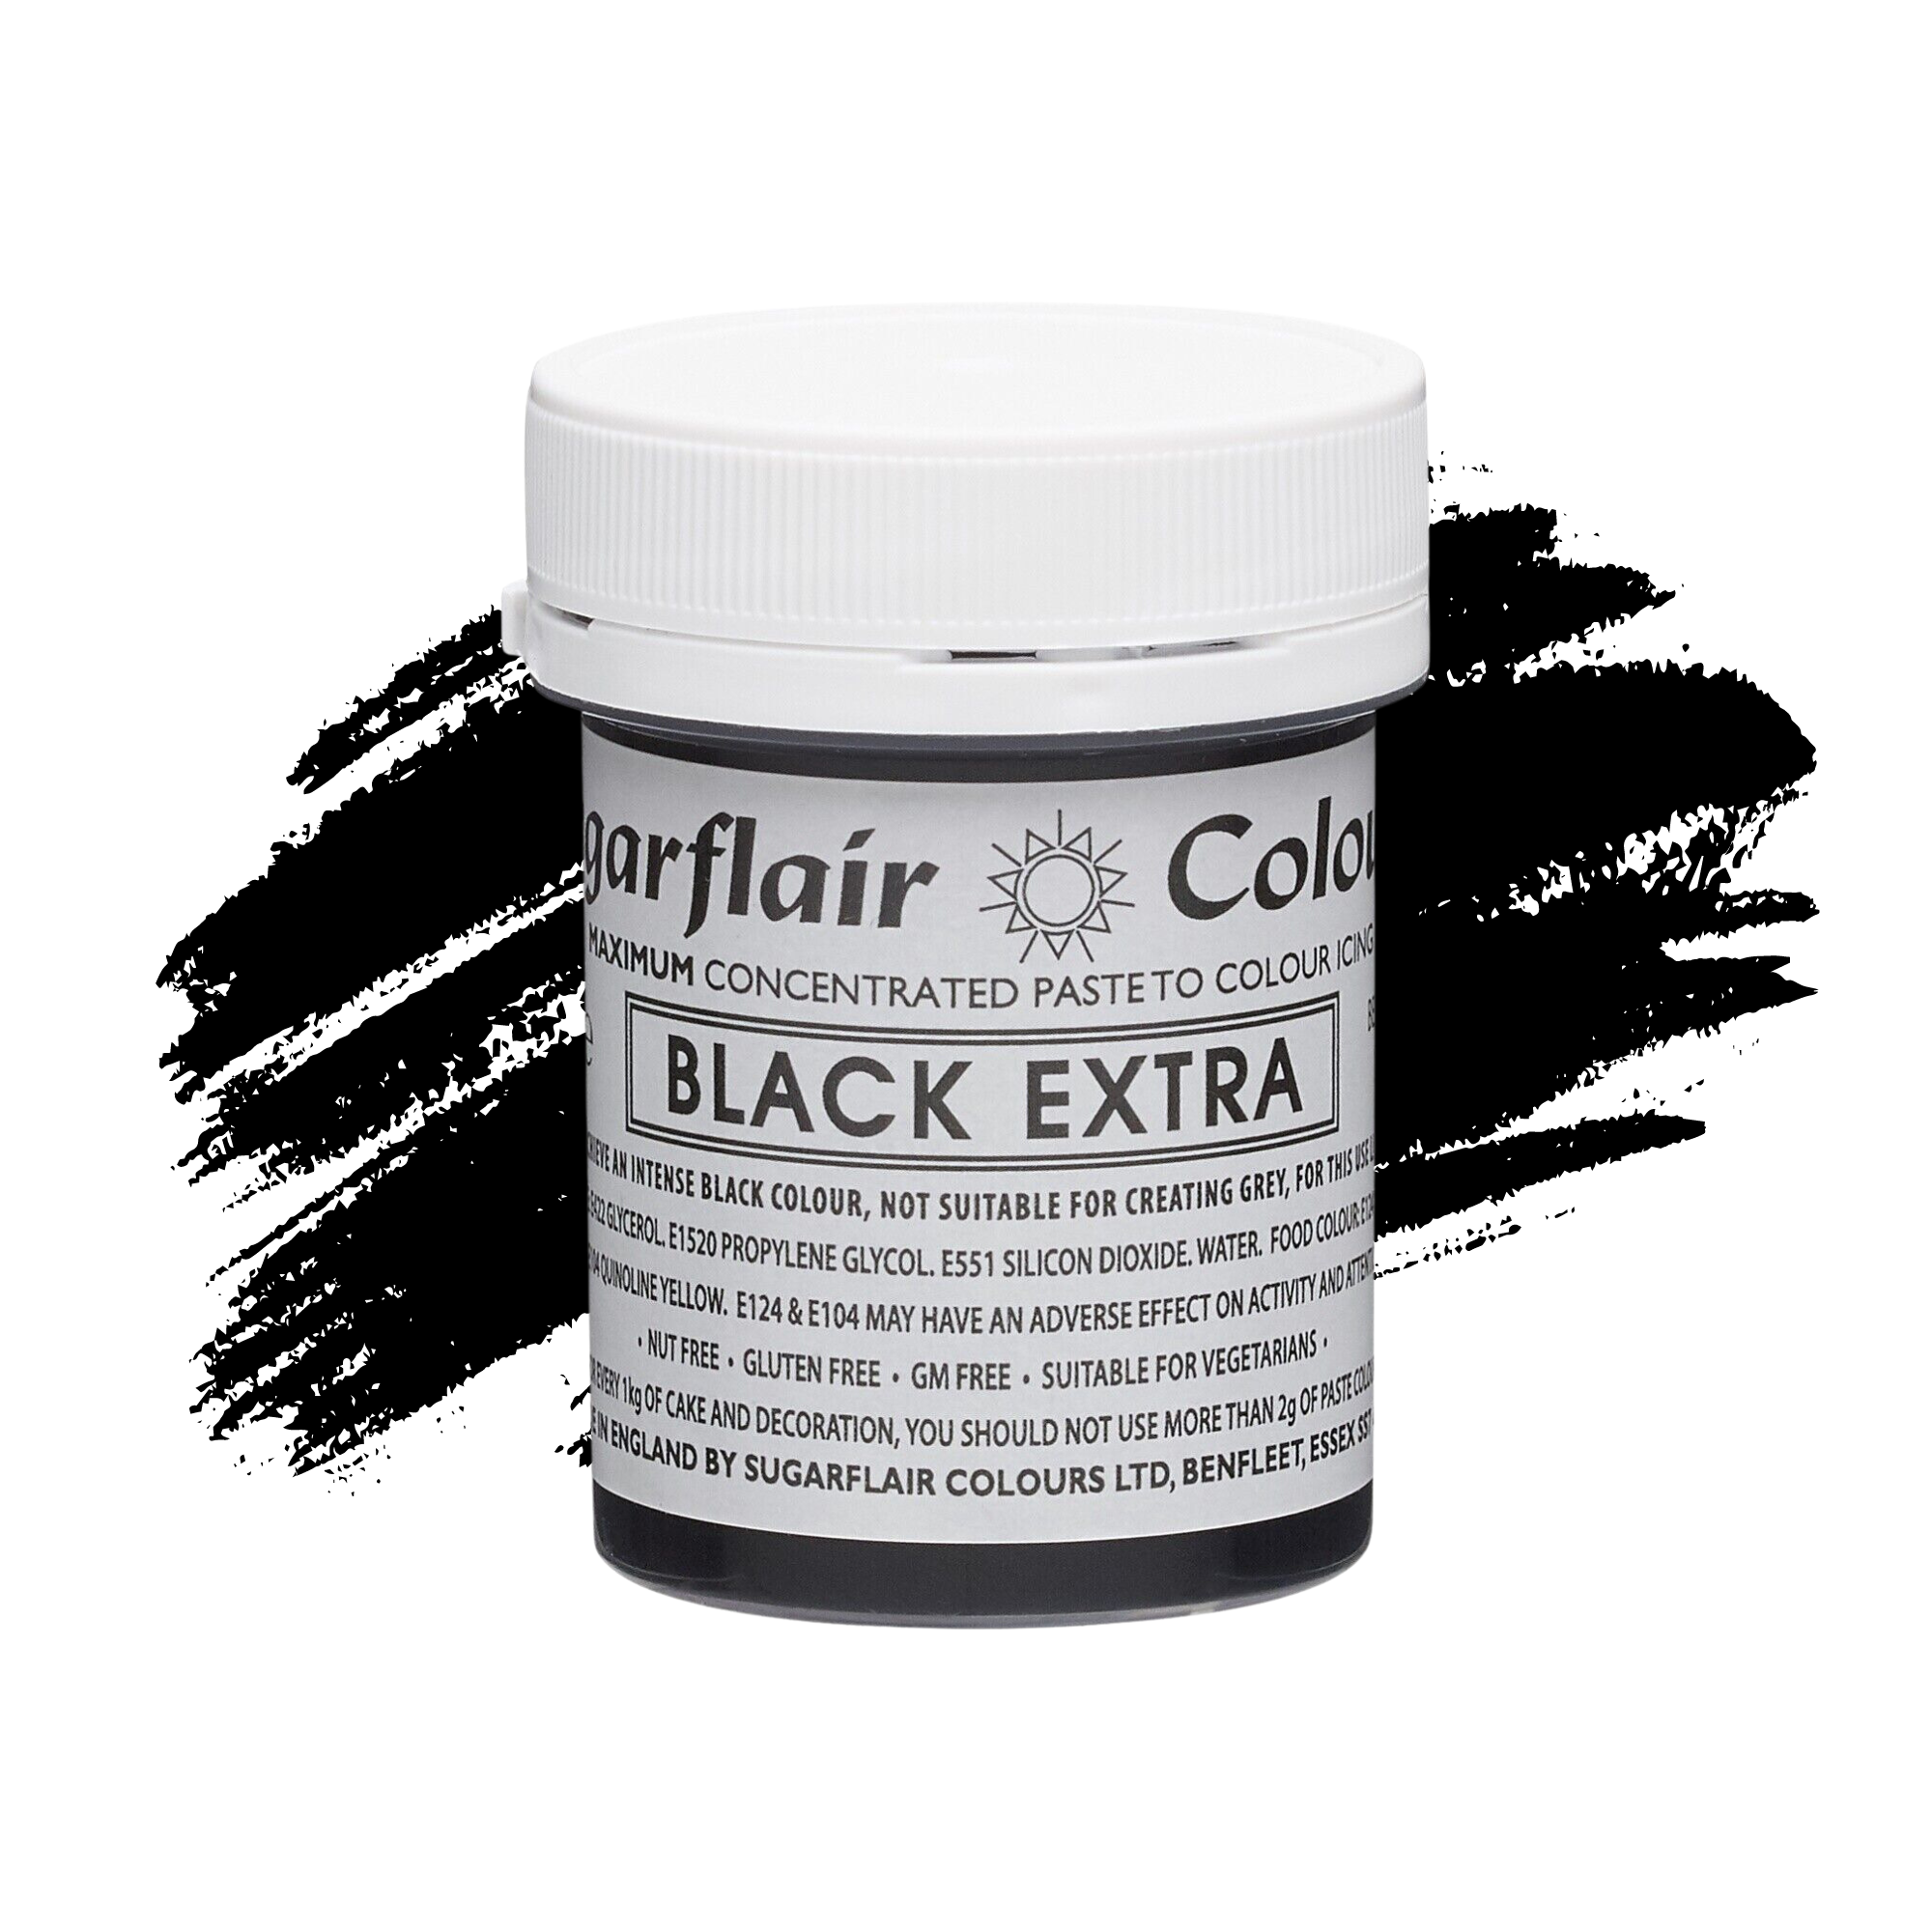 Sugarflair Paste Colours Maximum Concentrated Food Colouring - Black Extra - 42g